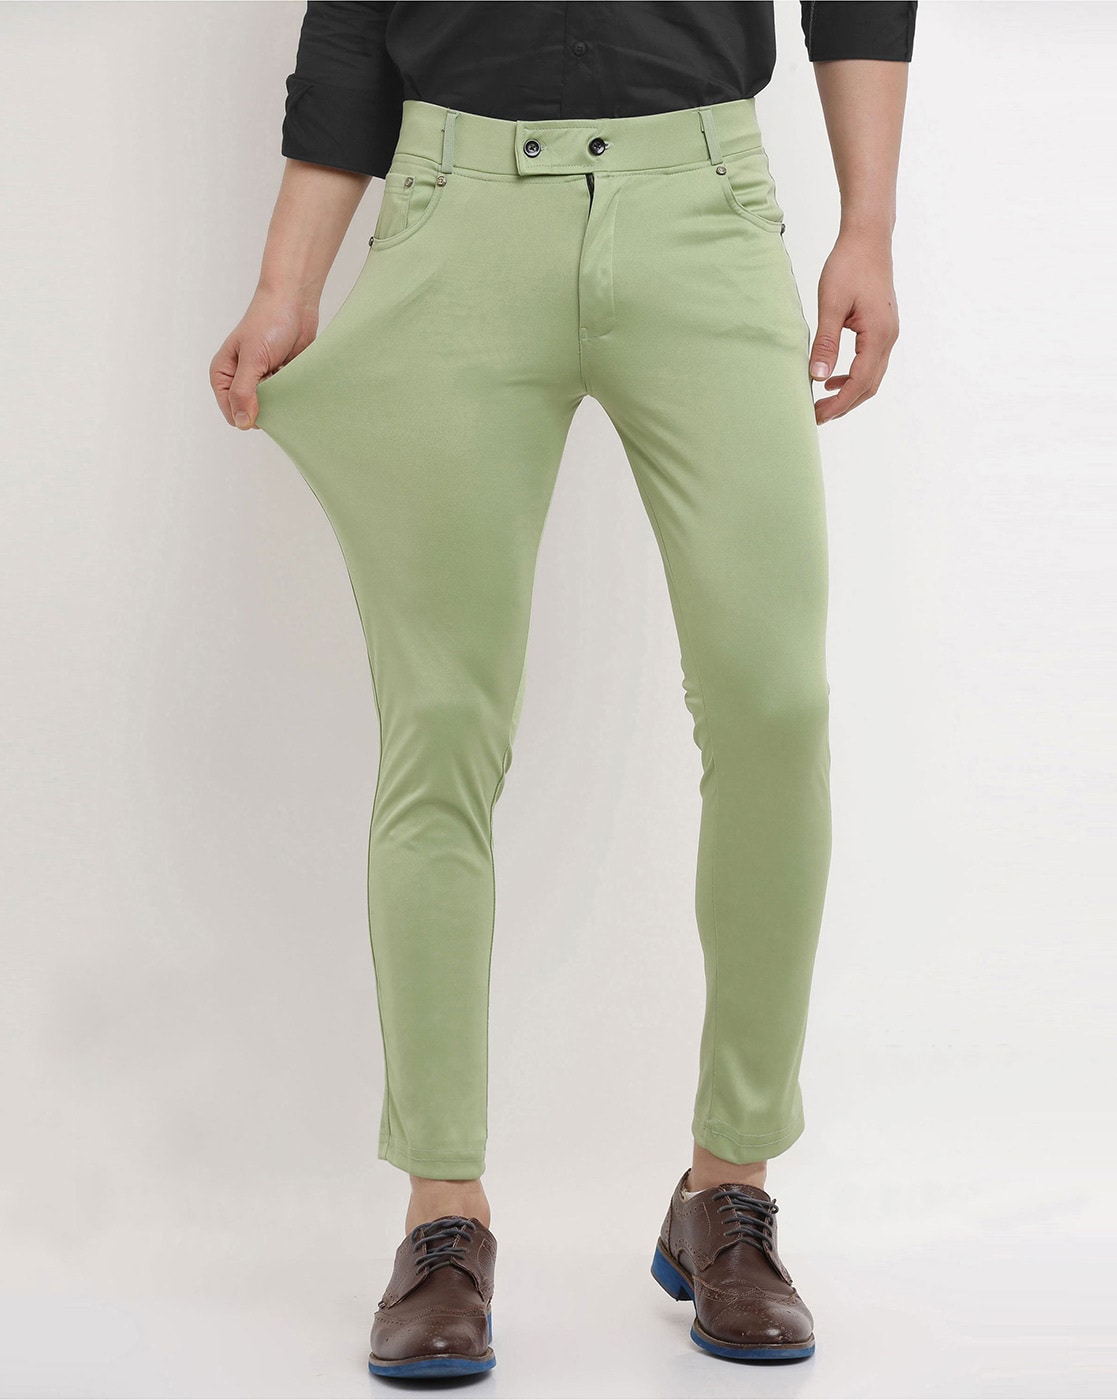 Pista Green Double Lace Pants – The Pajama Factory